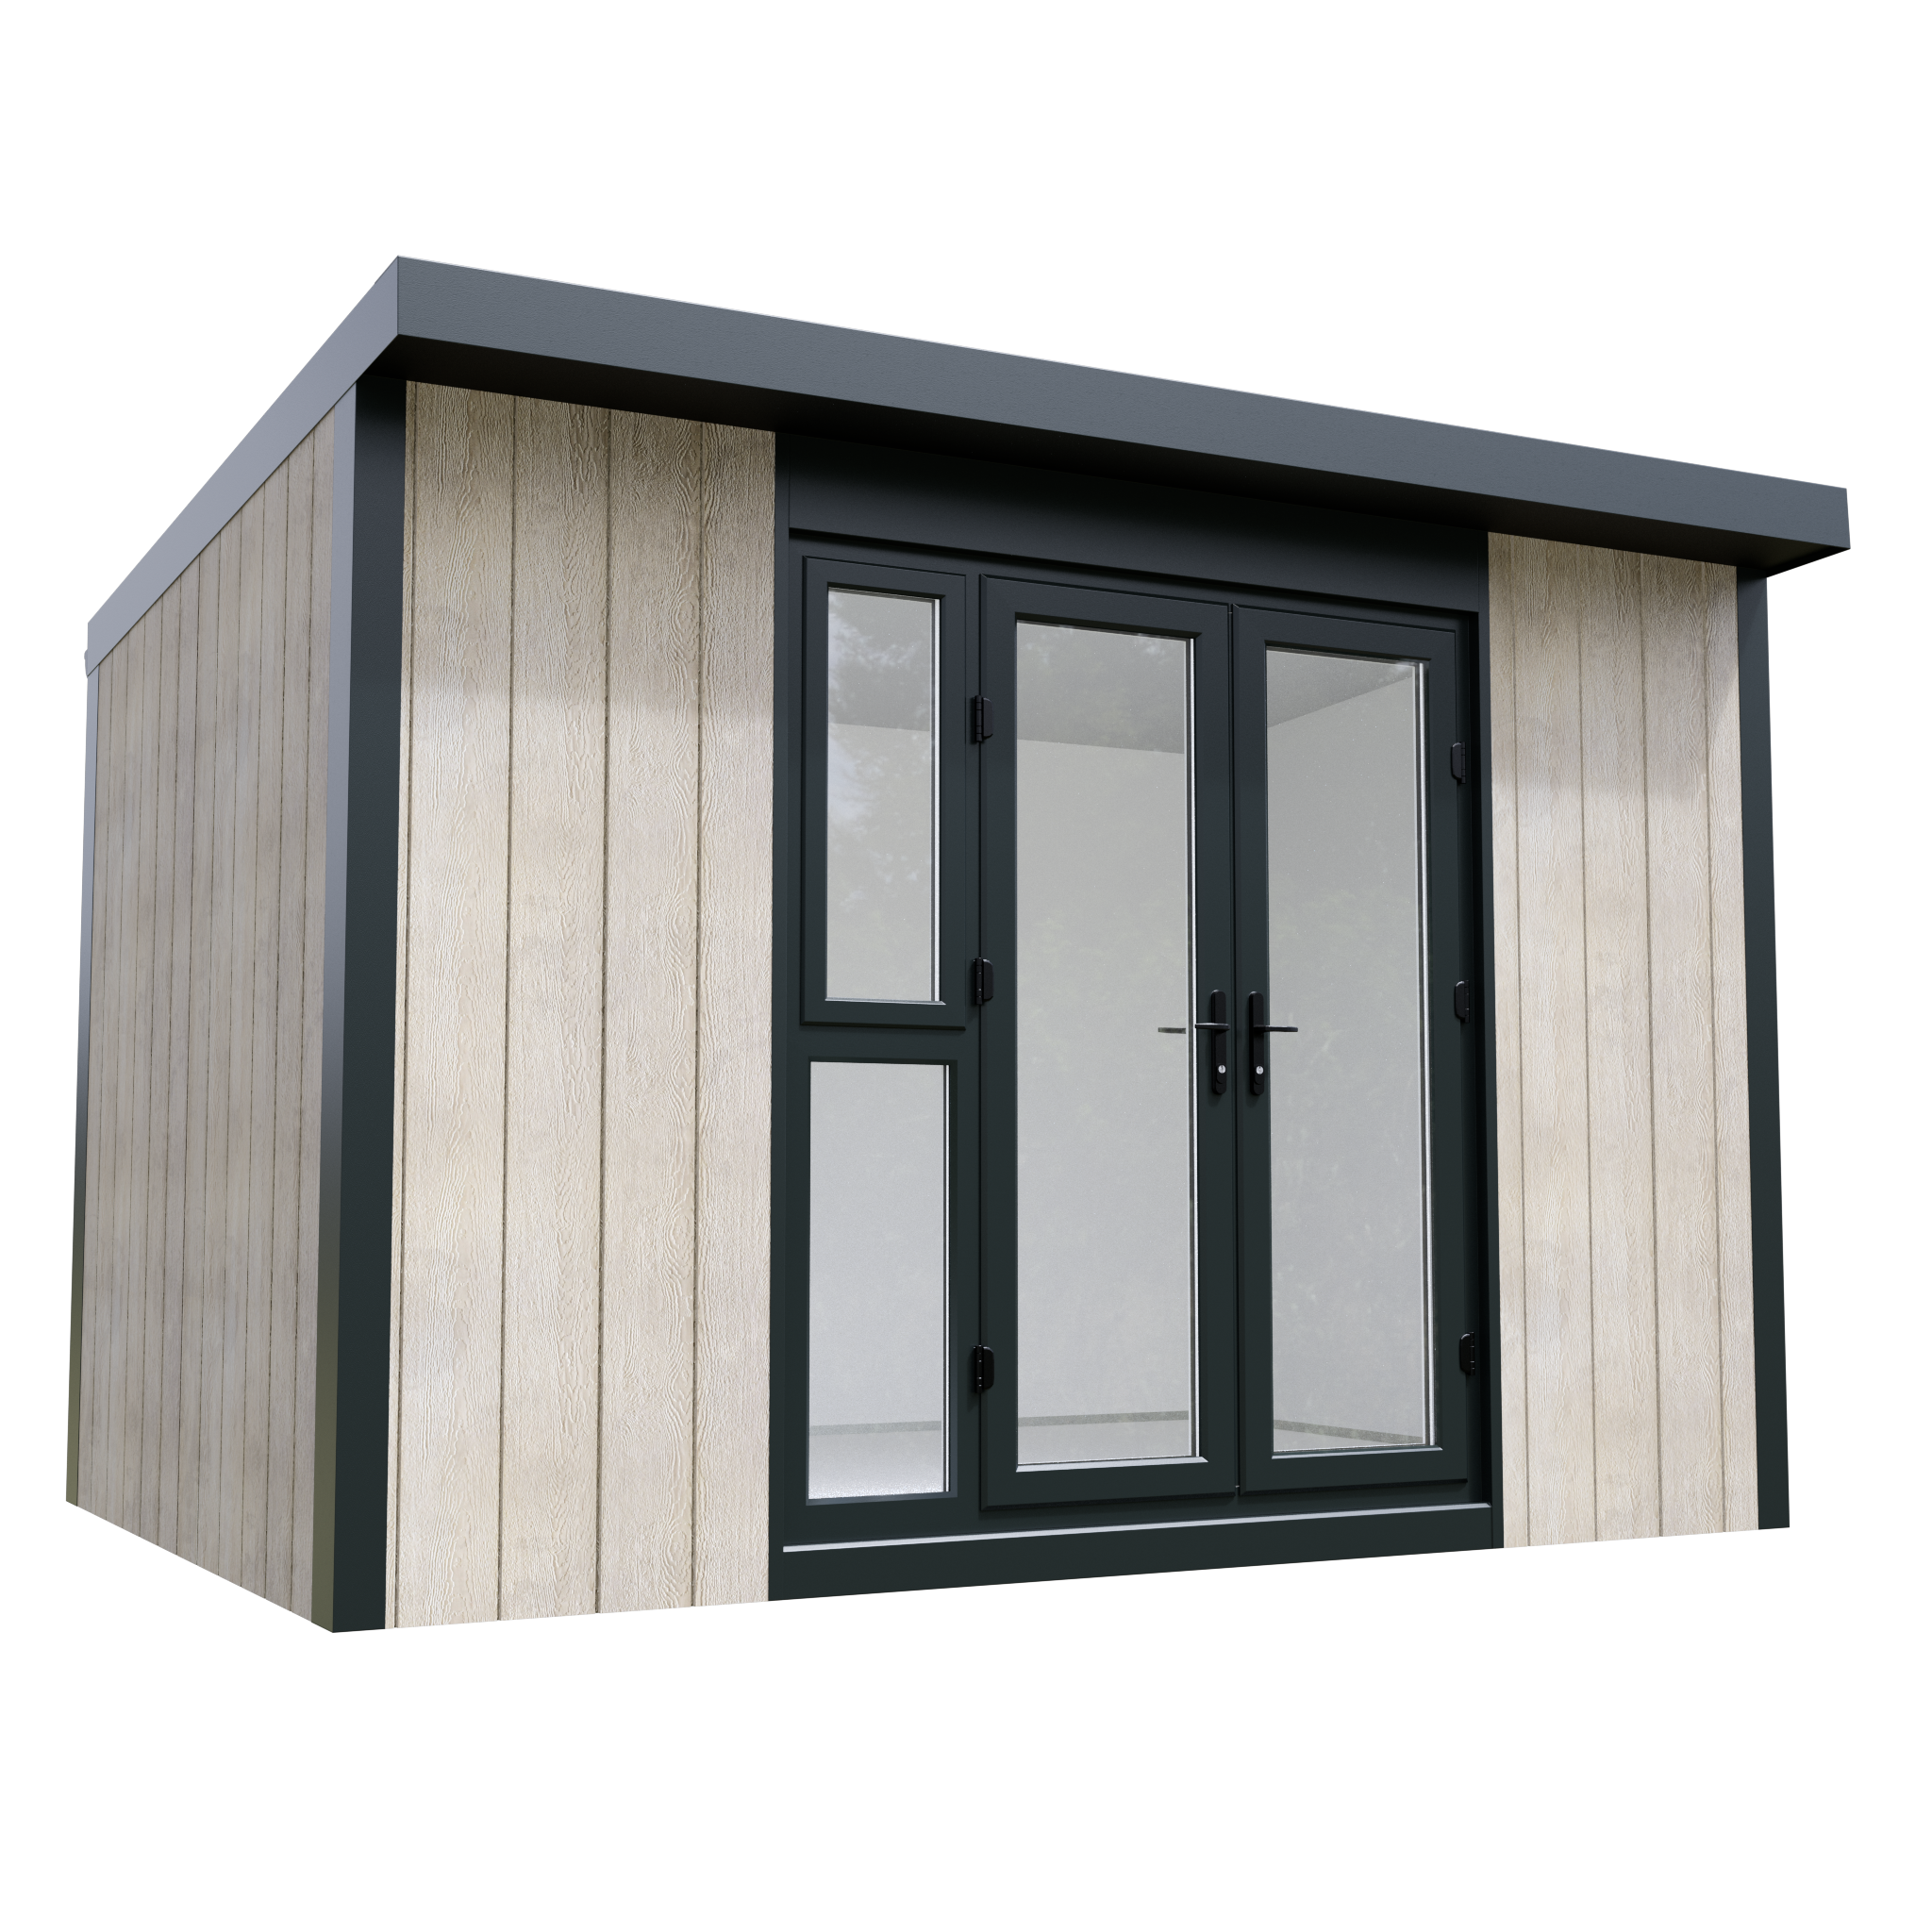 The smallest of our buildings, the Square Pod is the perfect blank canvas for any use. 2.44m x 2.44m | 8' x 8'